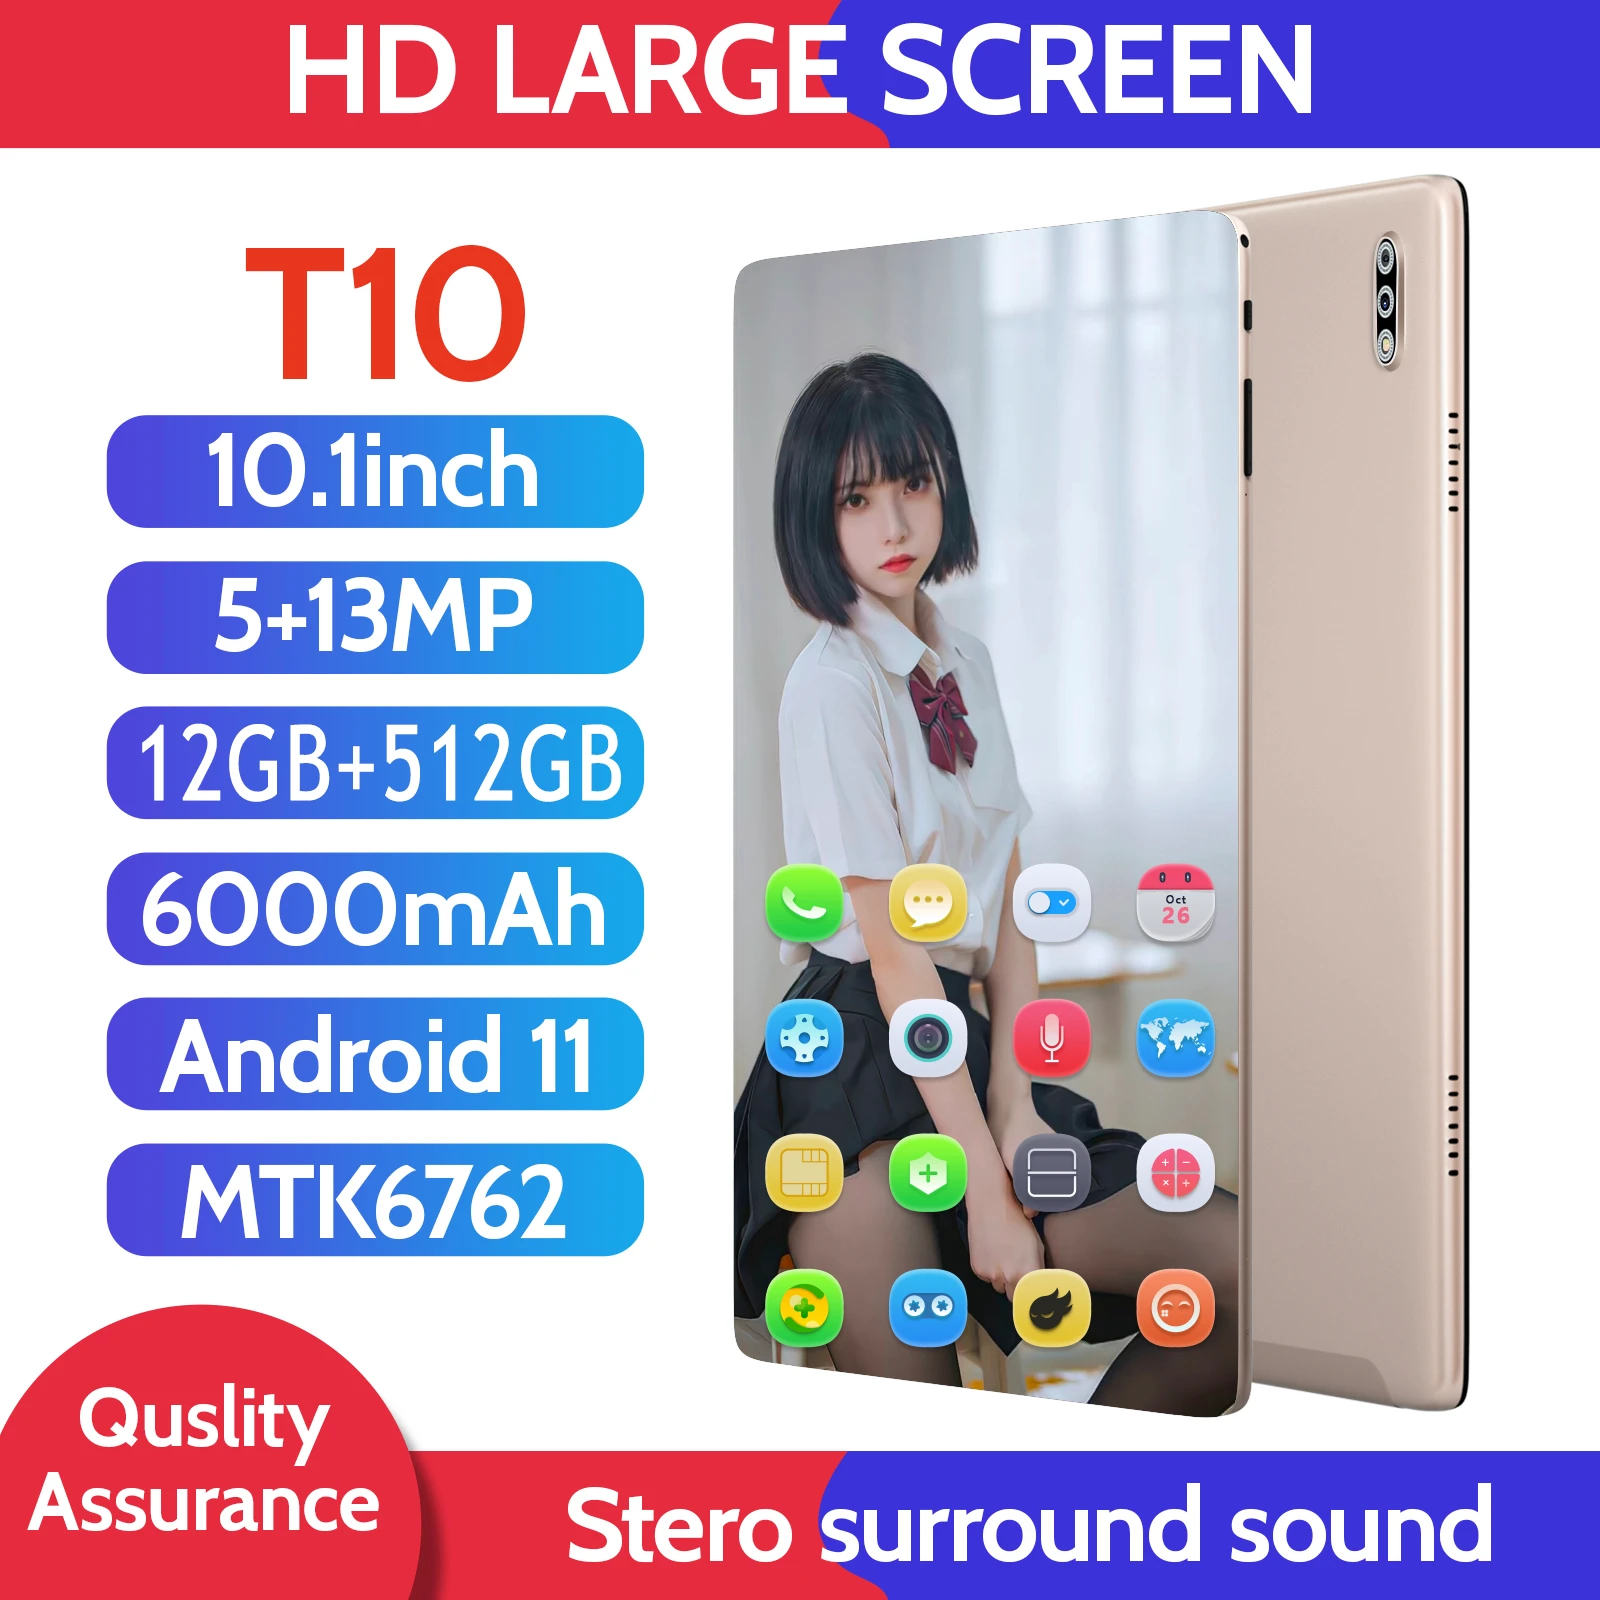 10.1Inch Large Screen T10 Pad 4G 5G Double SIM 6000mAh MTK6762 Wifi 512GB ROM Android 11 Google Play Race Hot Sales Tablet PC most popular tablet brands Tablets